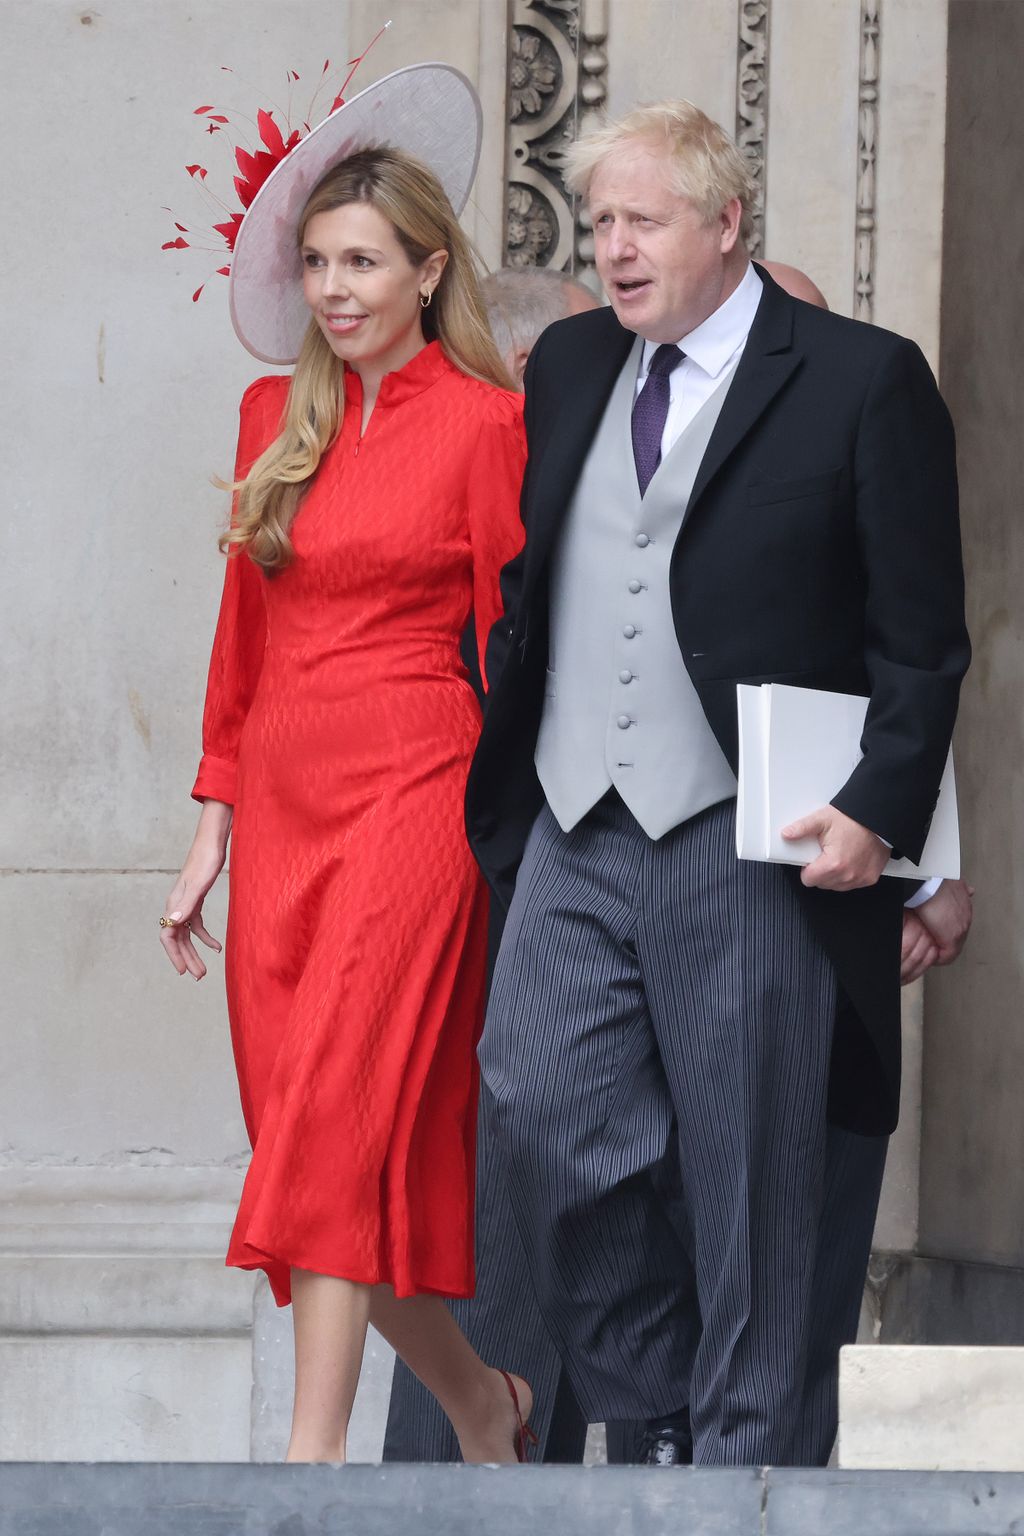 Boris Johnson in a suit and Carrie in red dress leaving St Paul's Cathedral